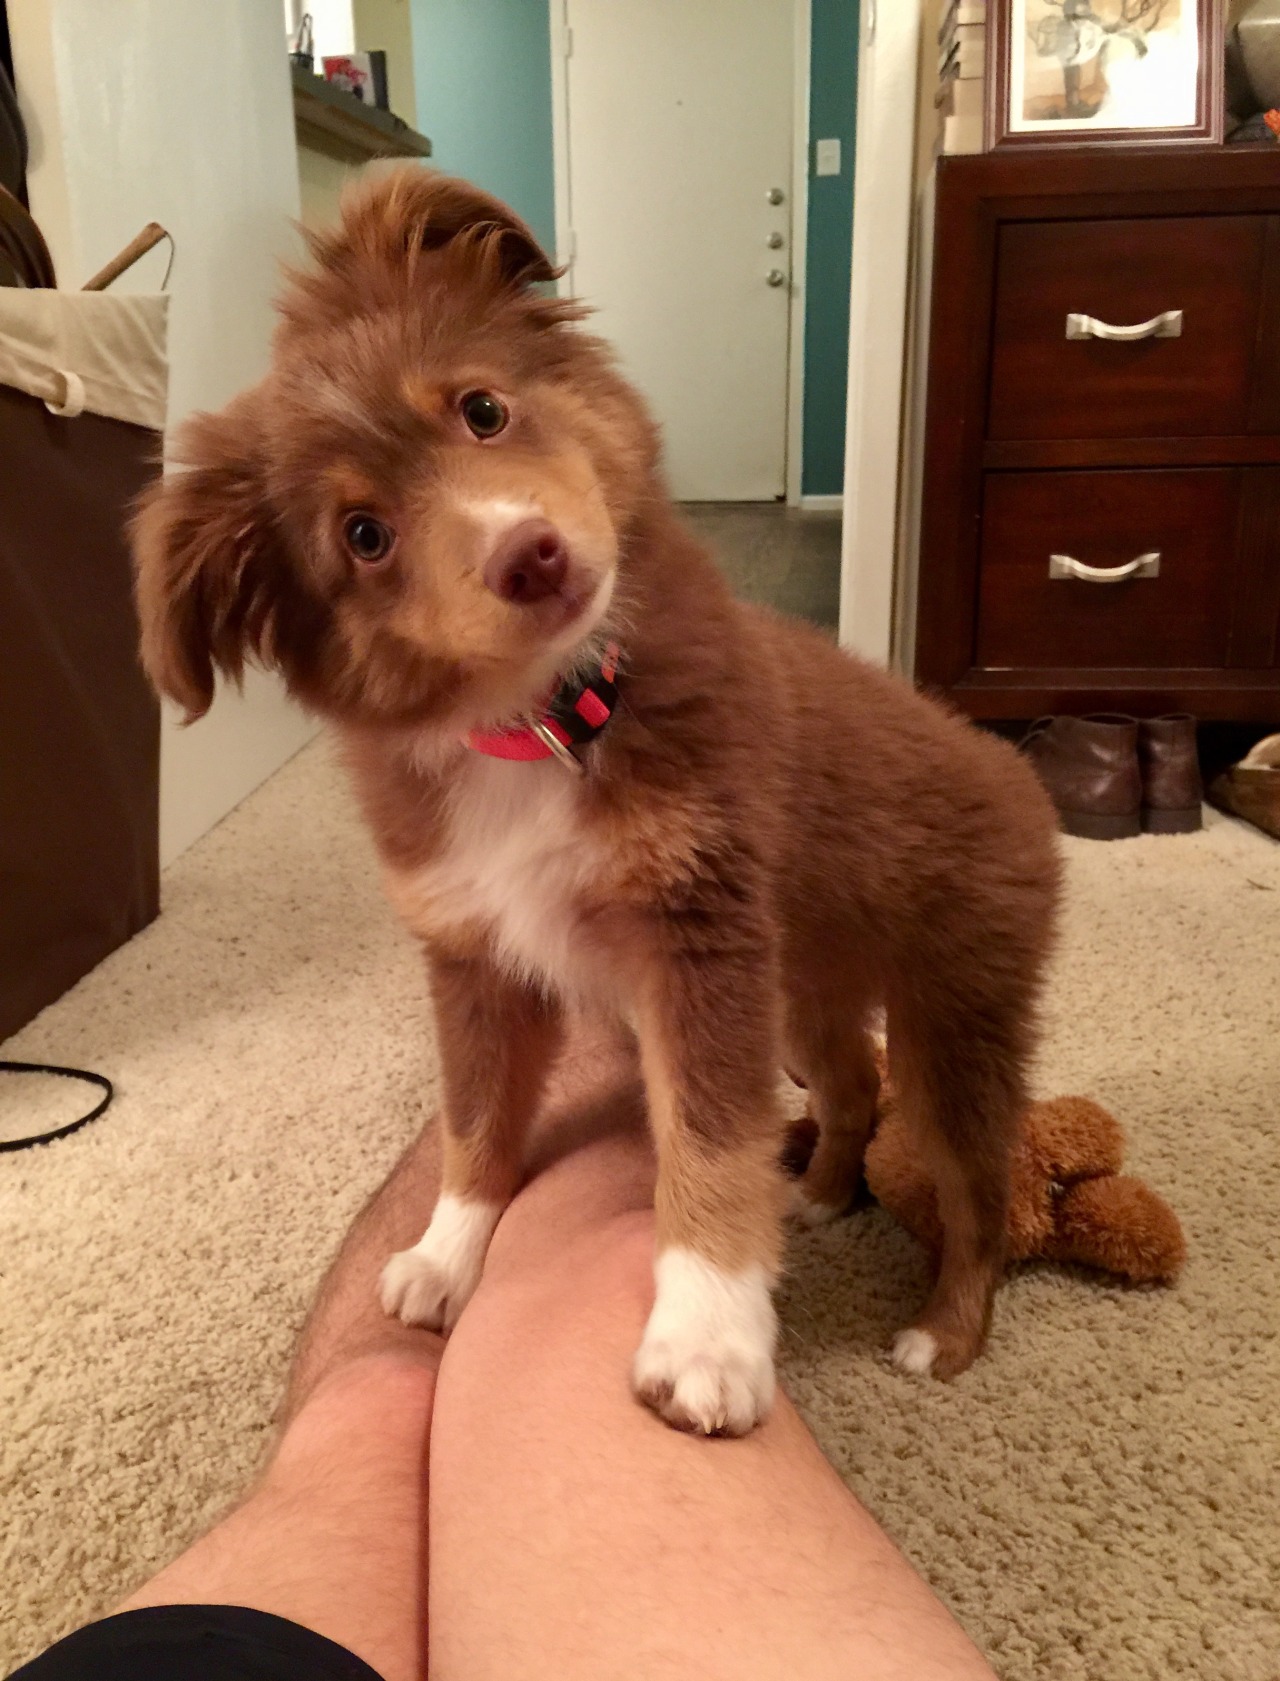 me-and-other-animals:
“Dad, why are your legs so white…? via /r/aww http://ift.tt/2imRTzq
”